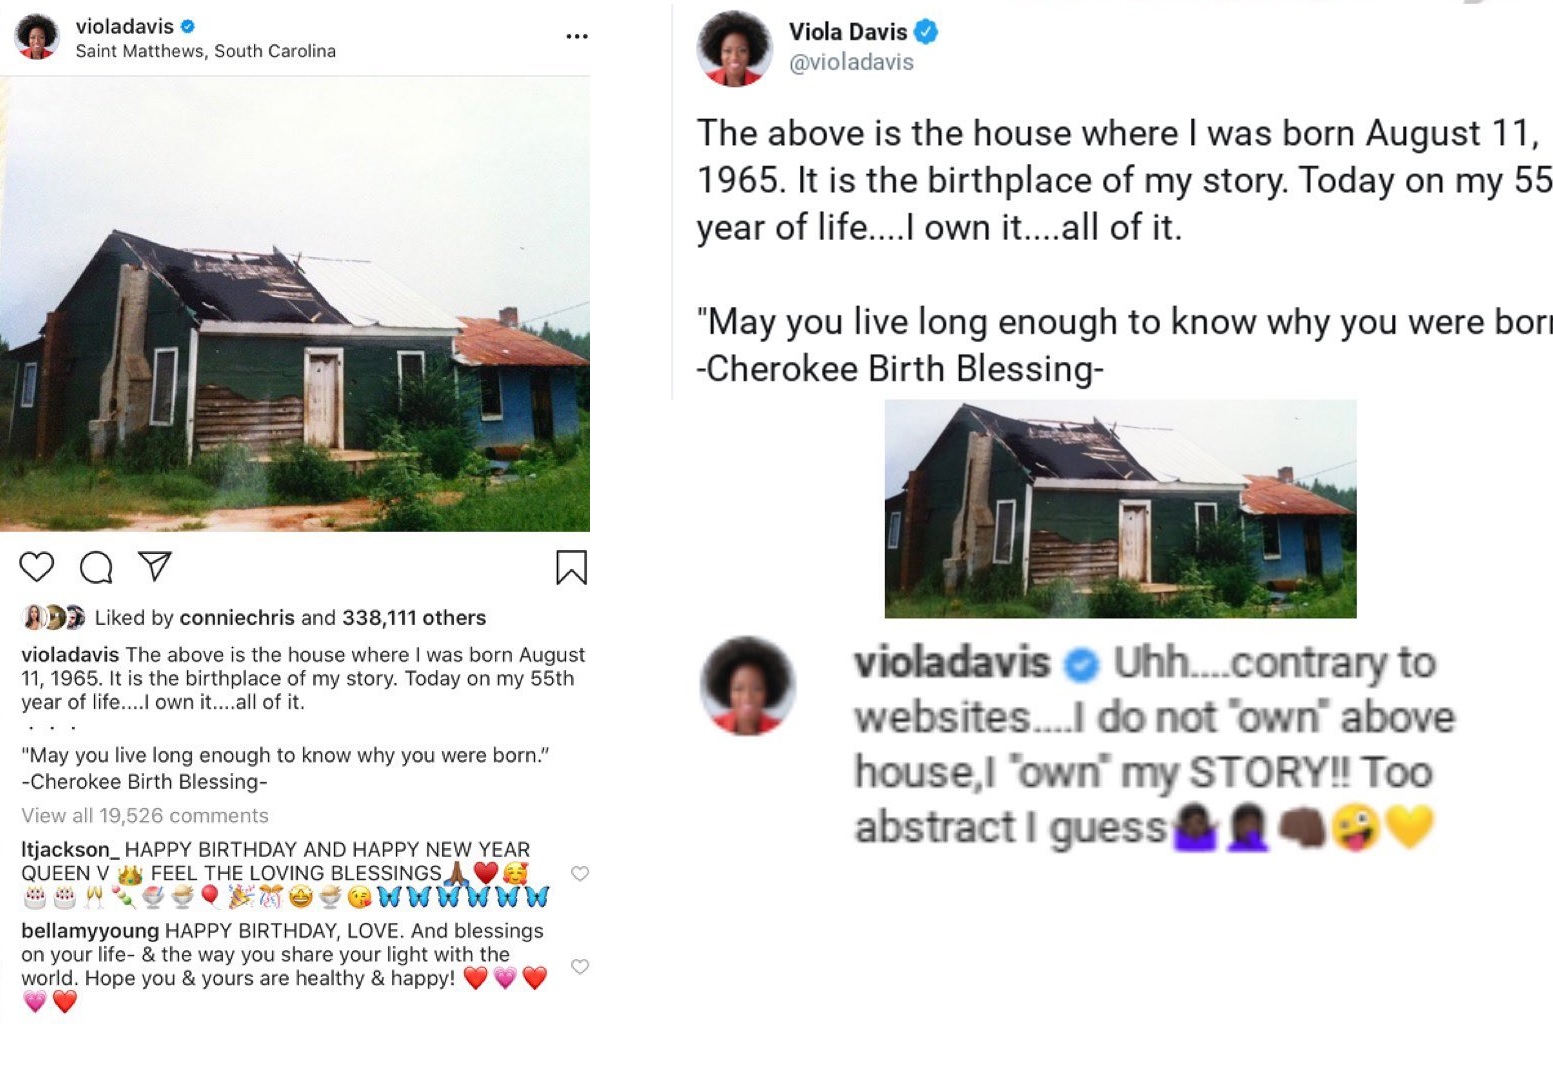 Viola Davis shared a photo of the plantation house, where she was born at, 55 years ago. Celebrating her birthday, this morning, Viola Davis said she "owns it all," which led people to believe she owns the whole plantation house, a reasonable assumption. However, Viola Davis would take to Twitter to speak out, saying she doesn't own the plantation house, but she instead owns her story "all of it," not the house.